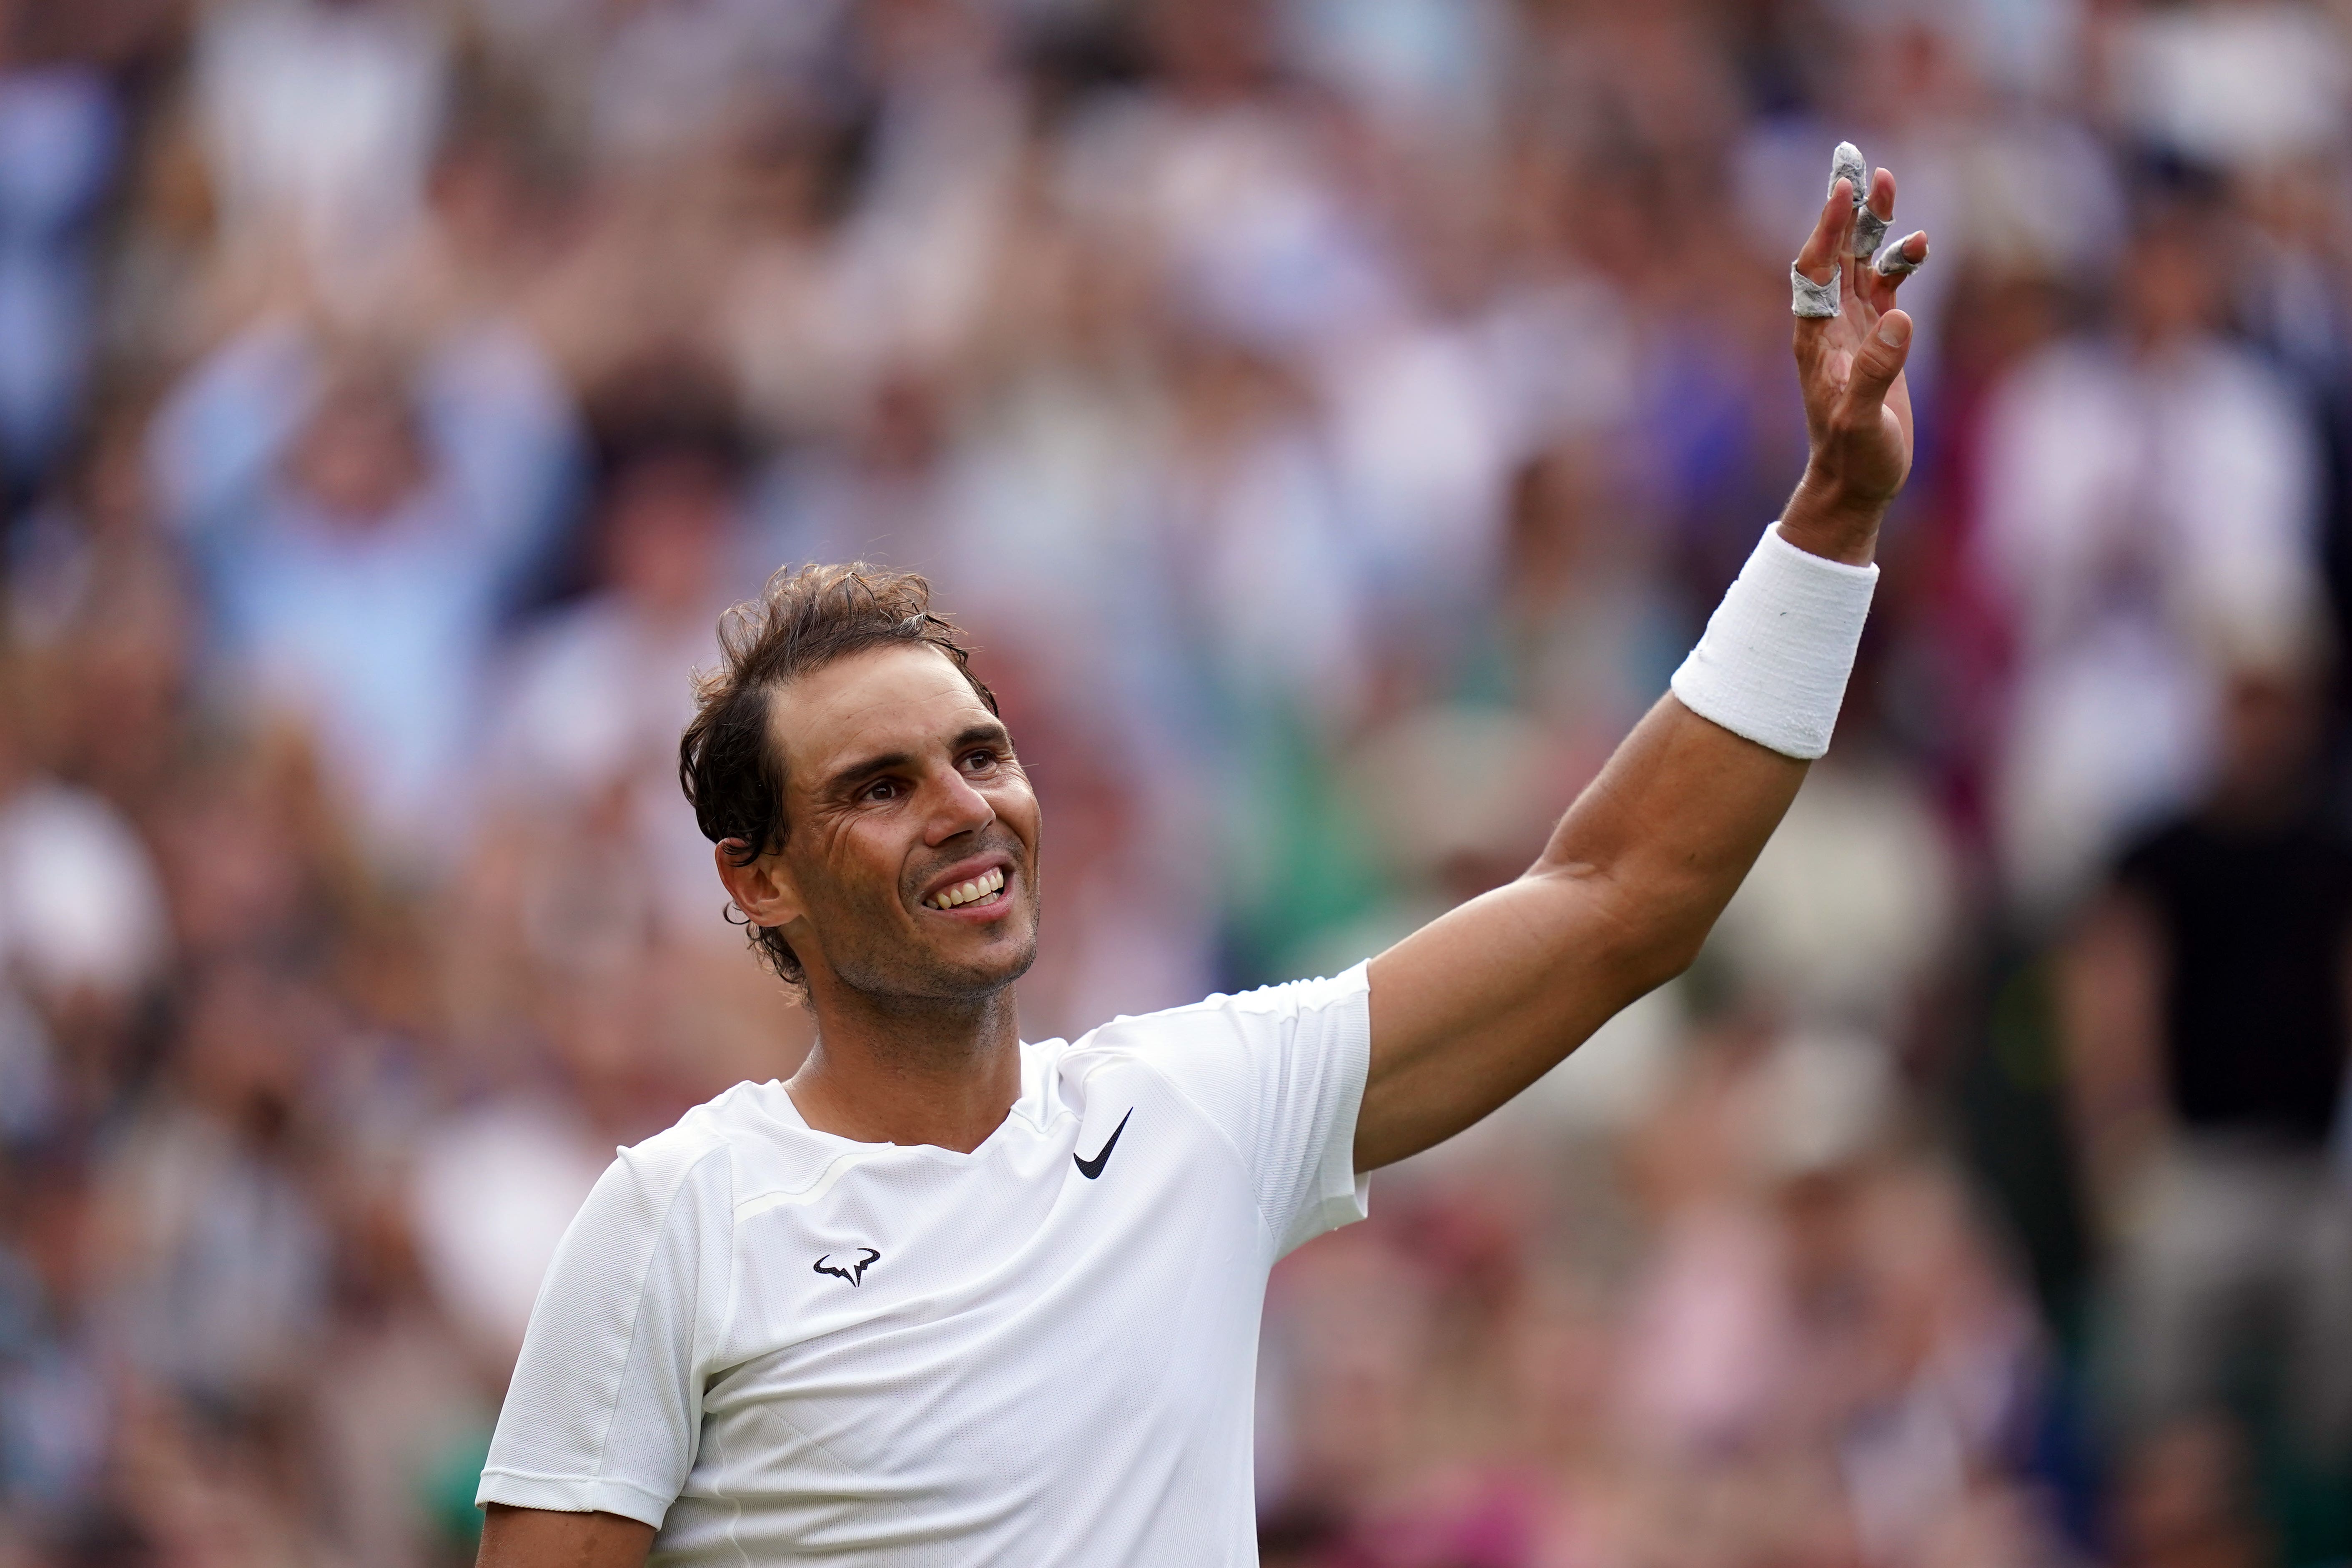 Rafael Nadal looks likely to have played his final match at Wimbledon (Adam Davy/PA)